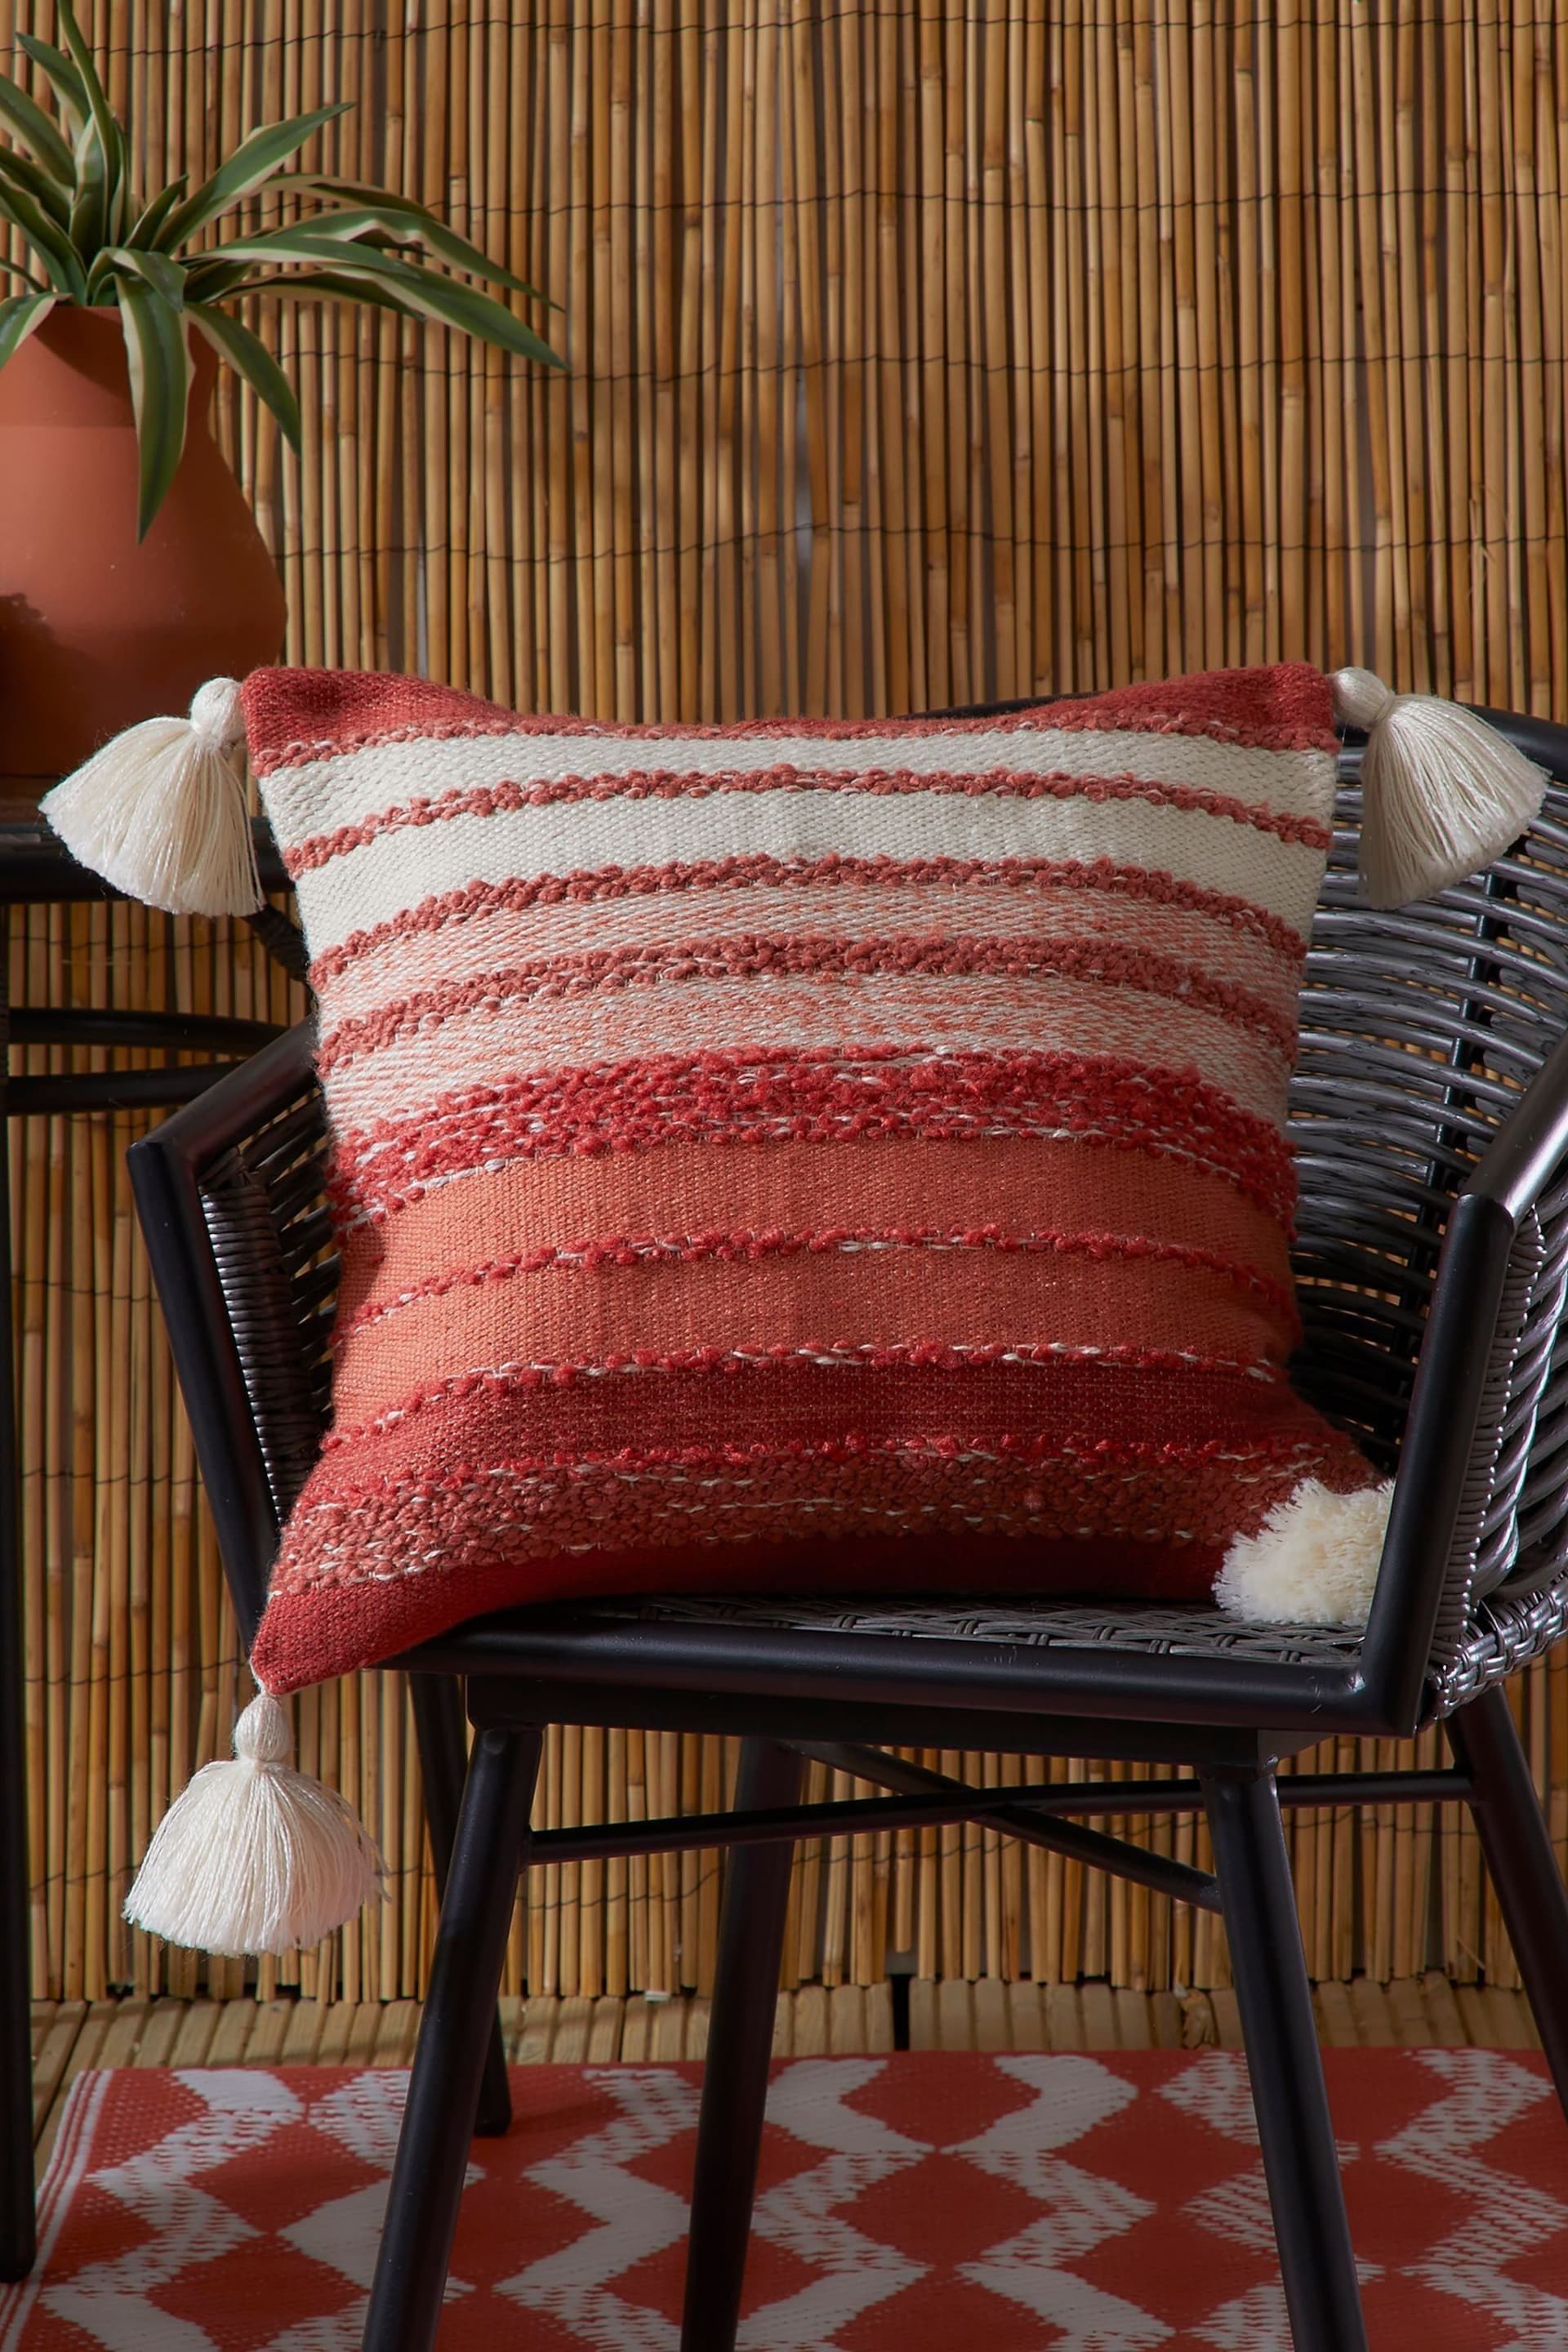 Drift Home Terracotta Red Grayson Outdoor Filled Cushion - Image 1 of 5